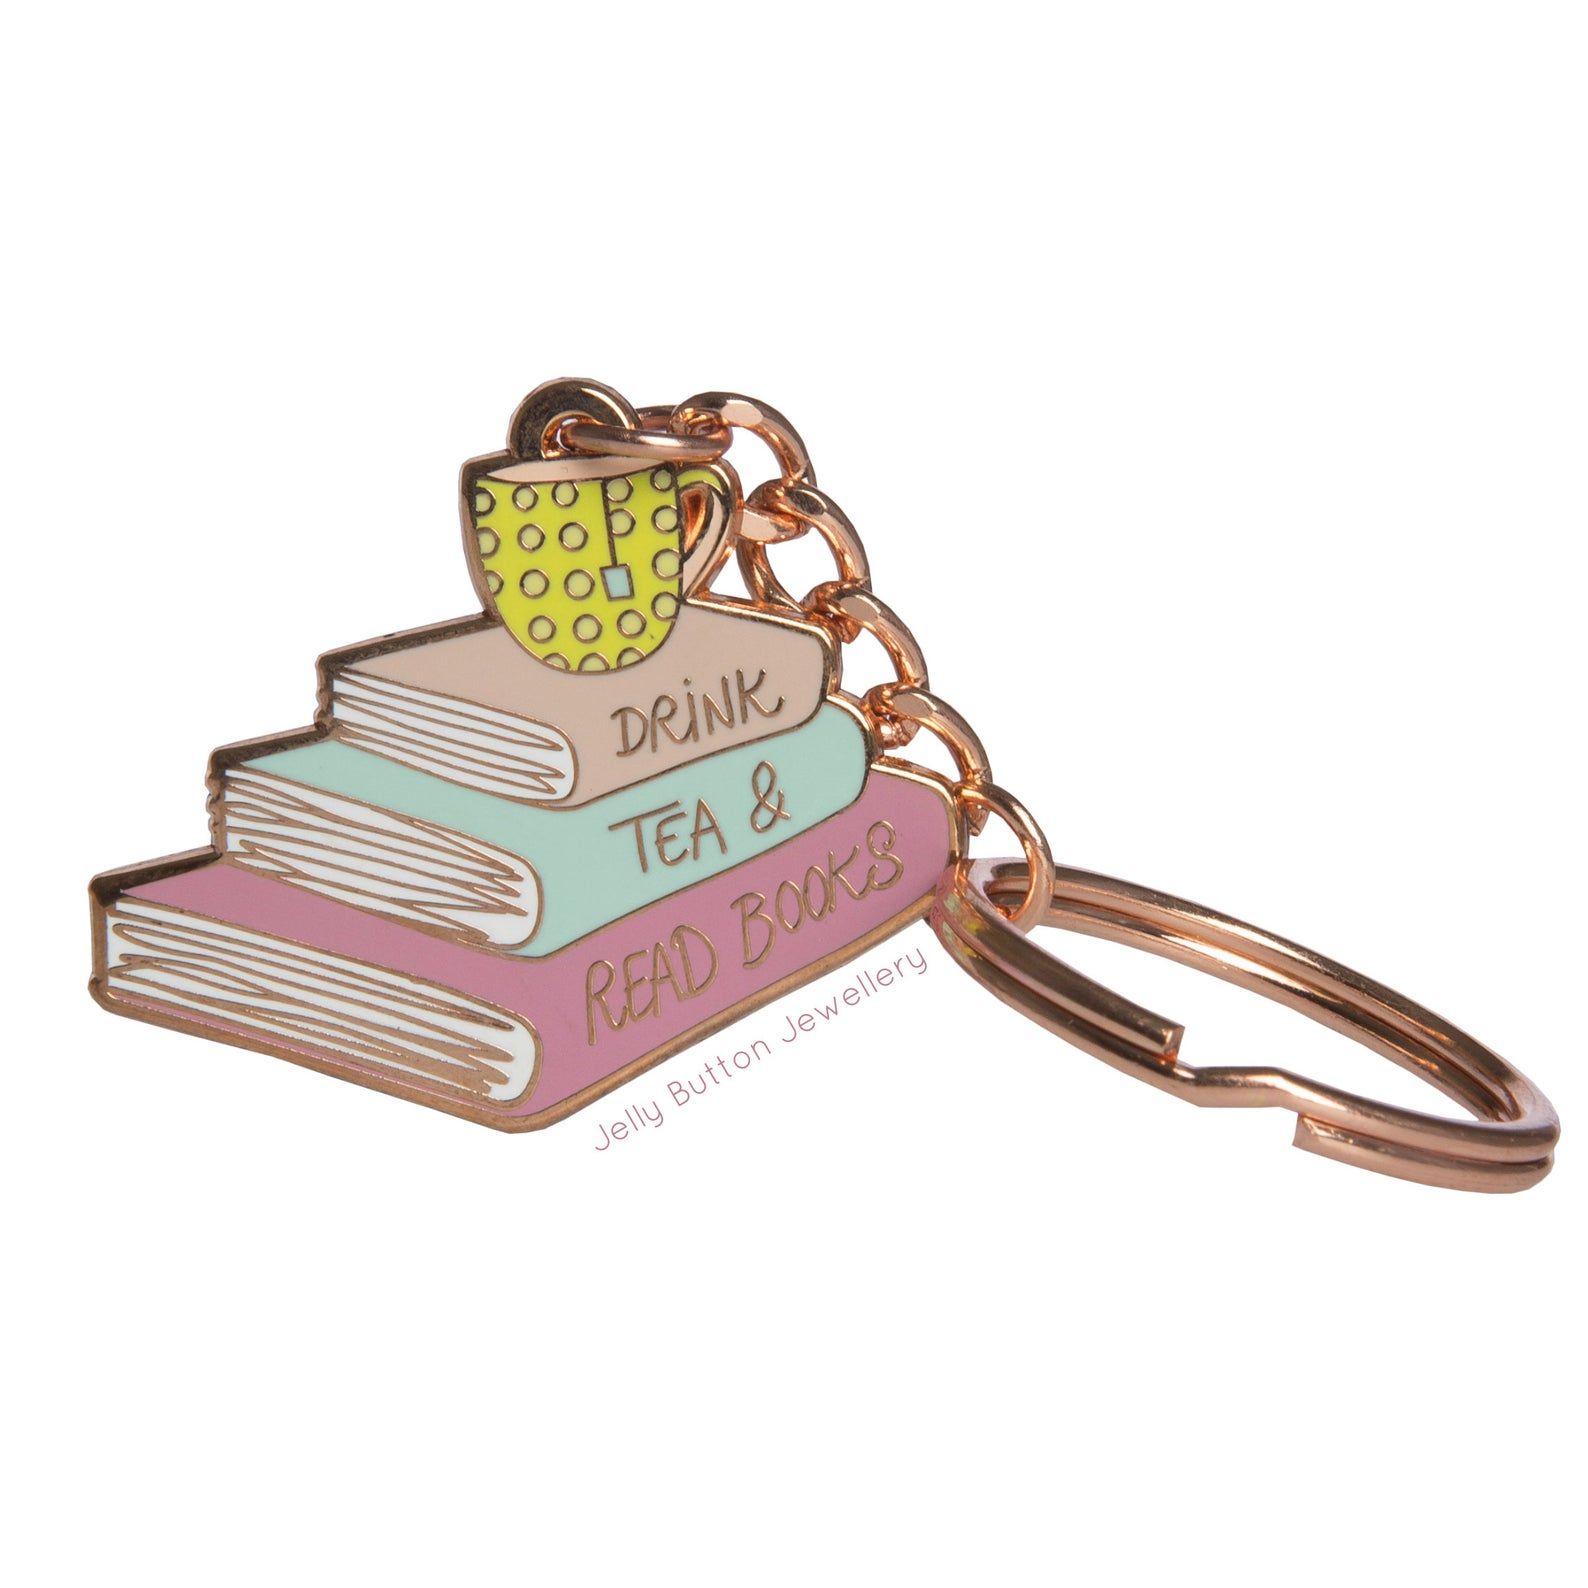 Image of a roase gold keychain that depicts a stack of books and a tea cup, and reads "Drink tea & read books."